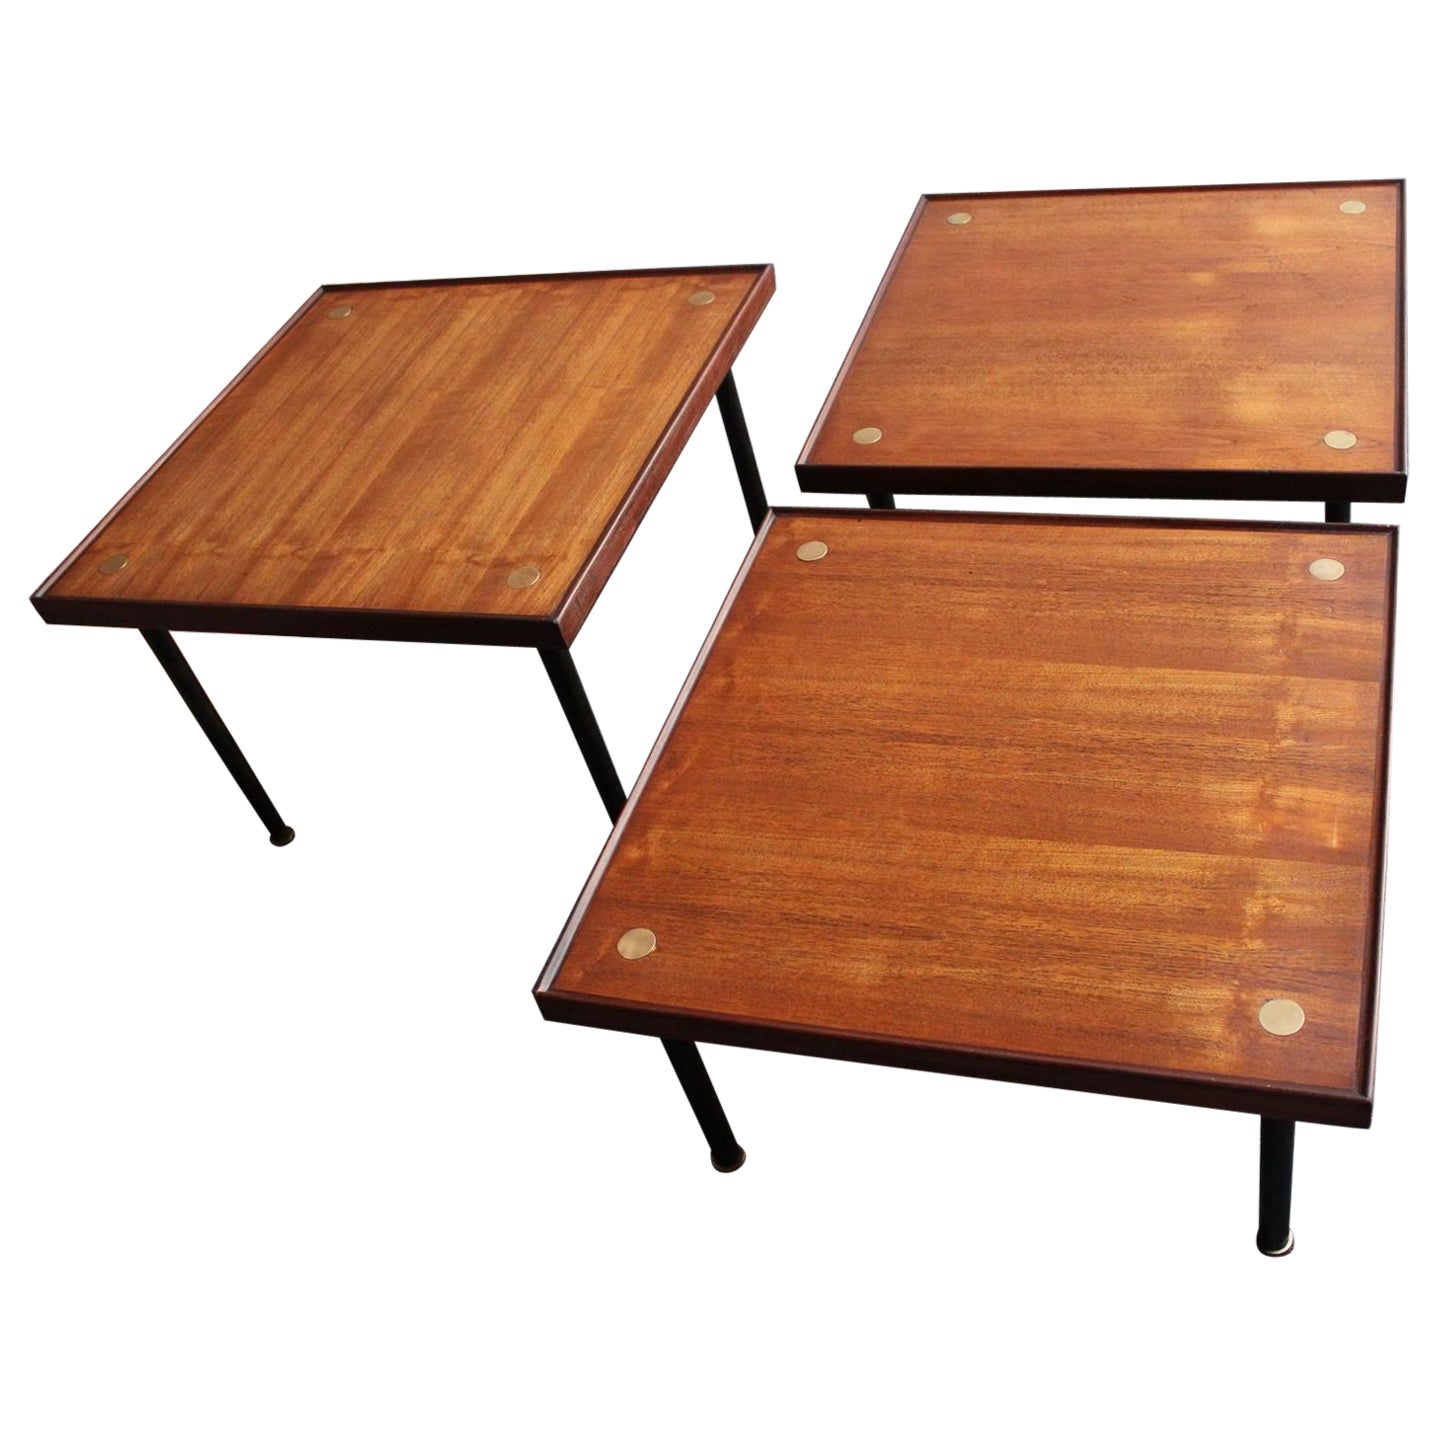 Set of Three Rosewood "Konvival" Tables/Settee by Fabrizio Bruno for Klan Italy For Sale